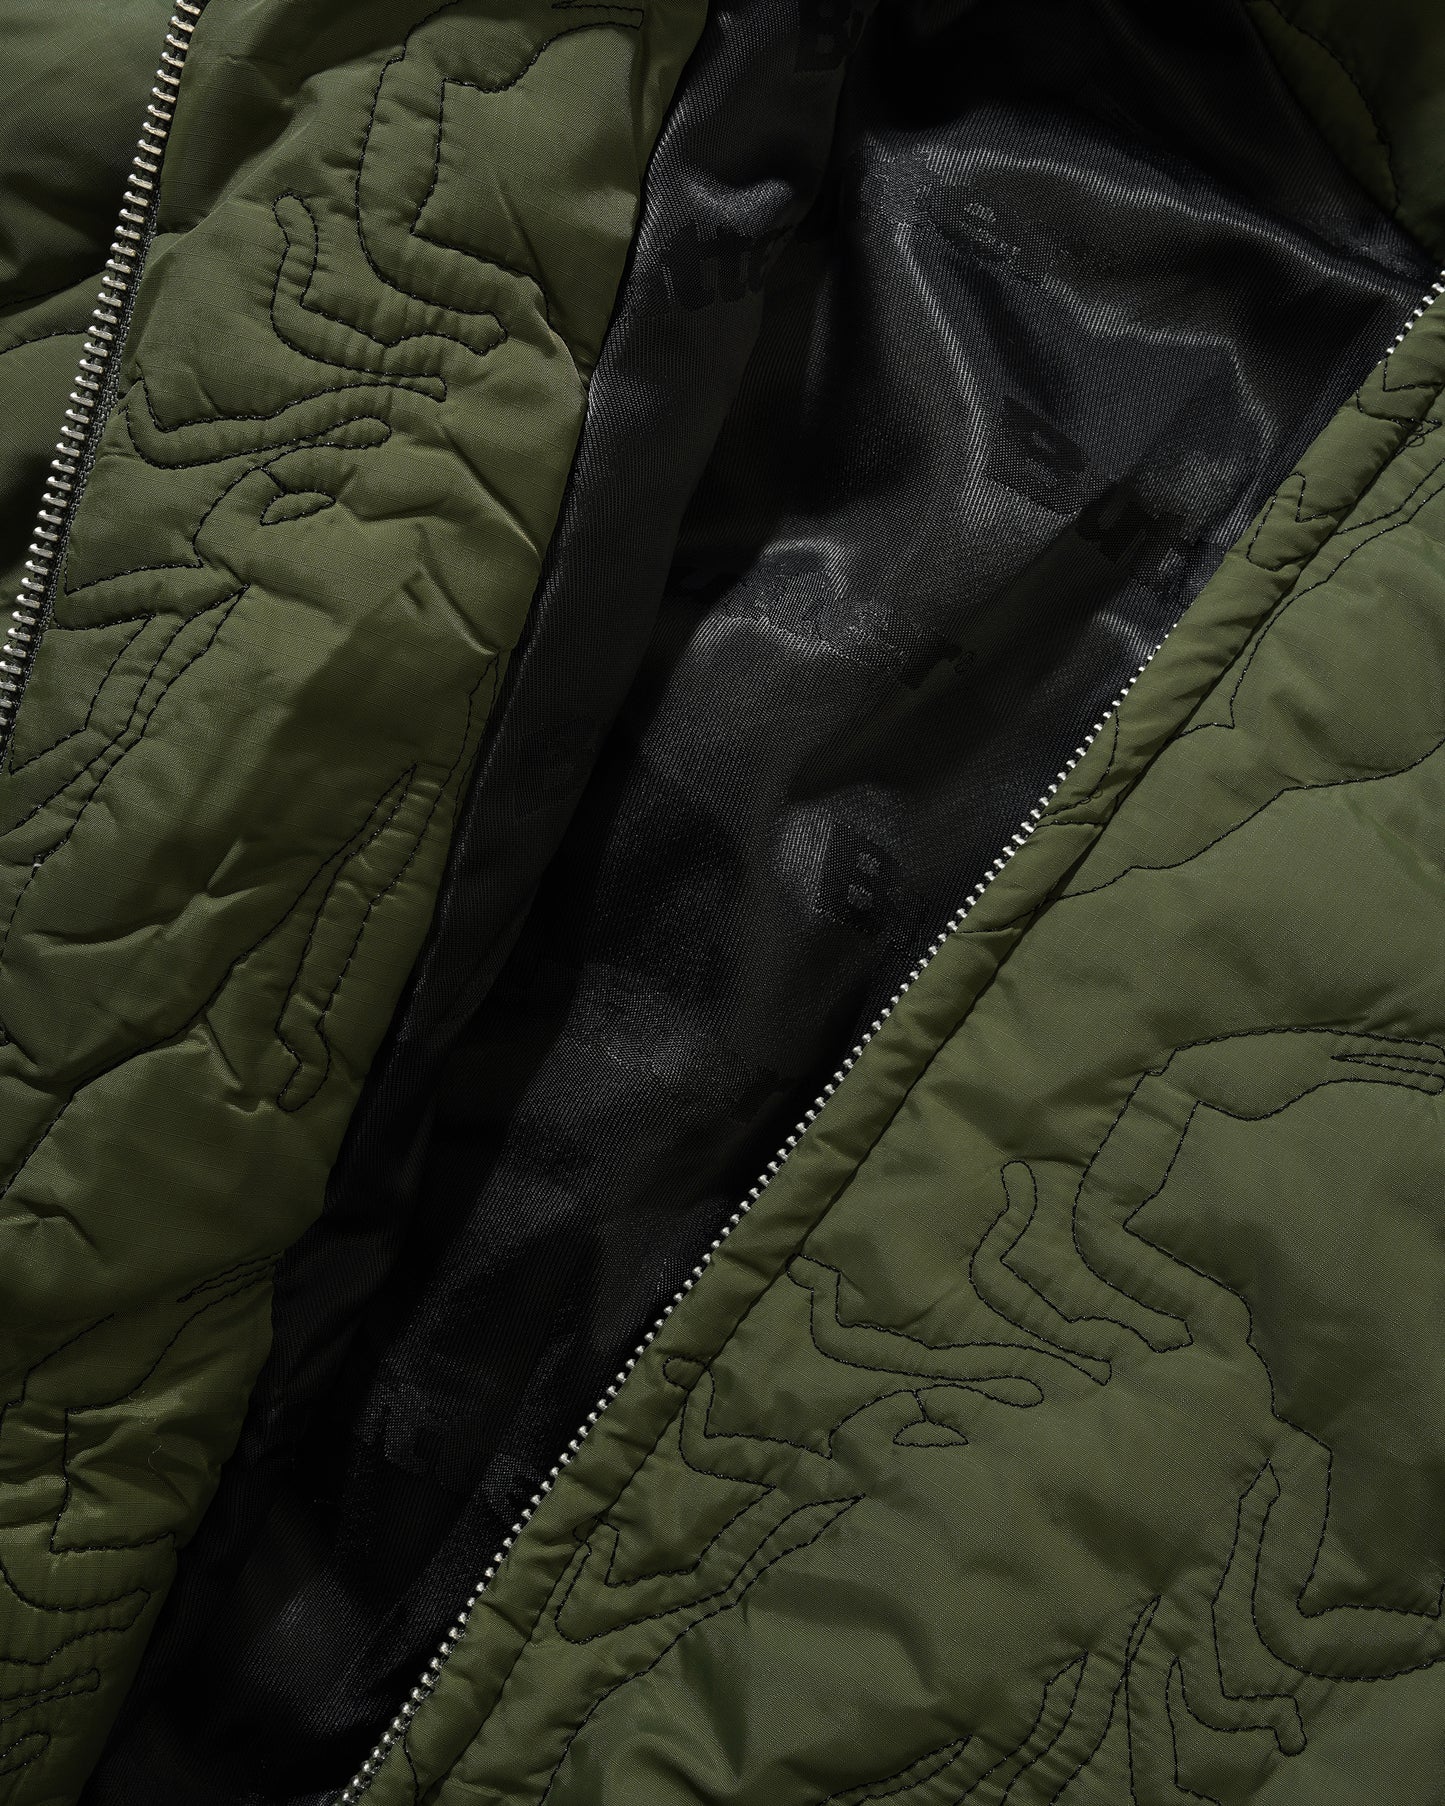 Butter Goods Scorpion Jacket Army